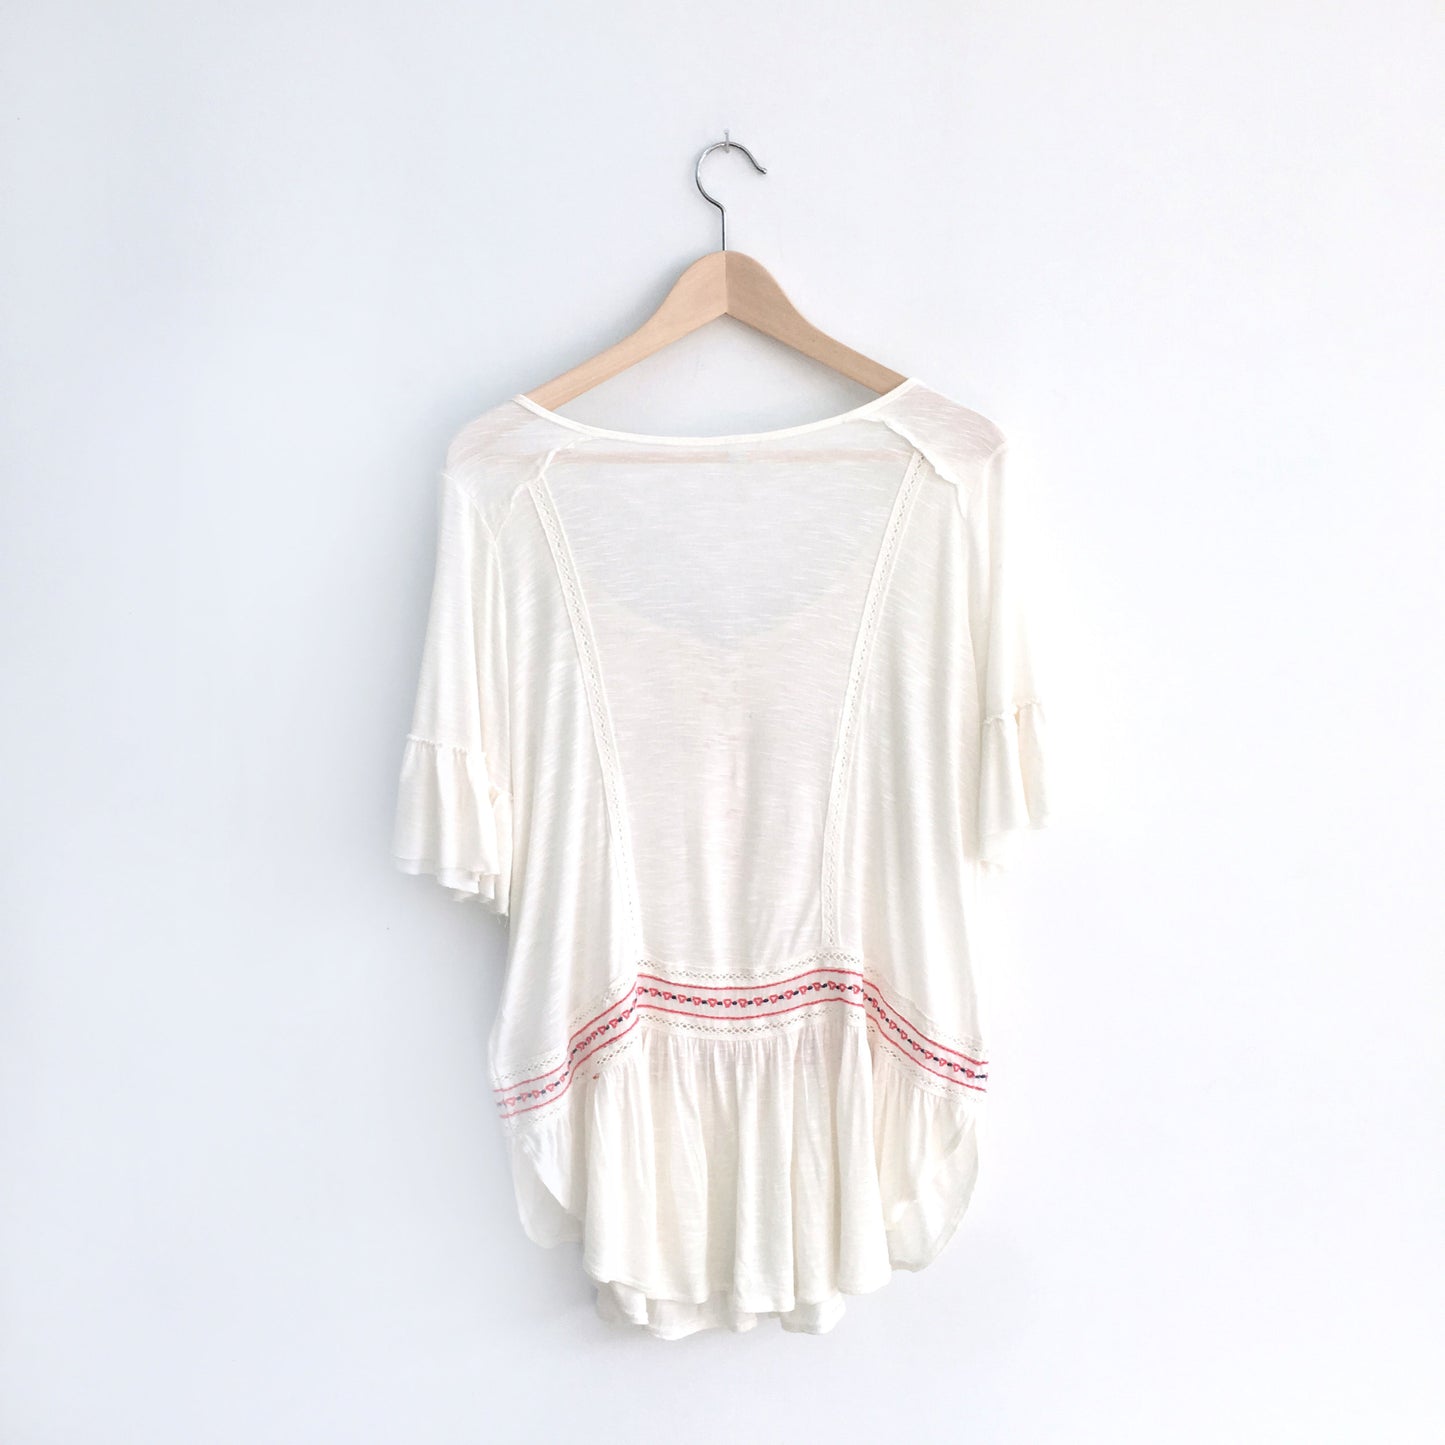 Free People Boho top with Embroidery - size Small